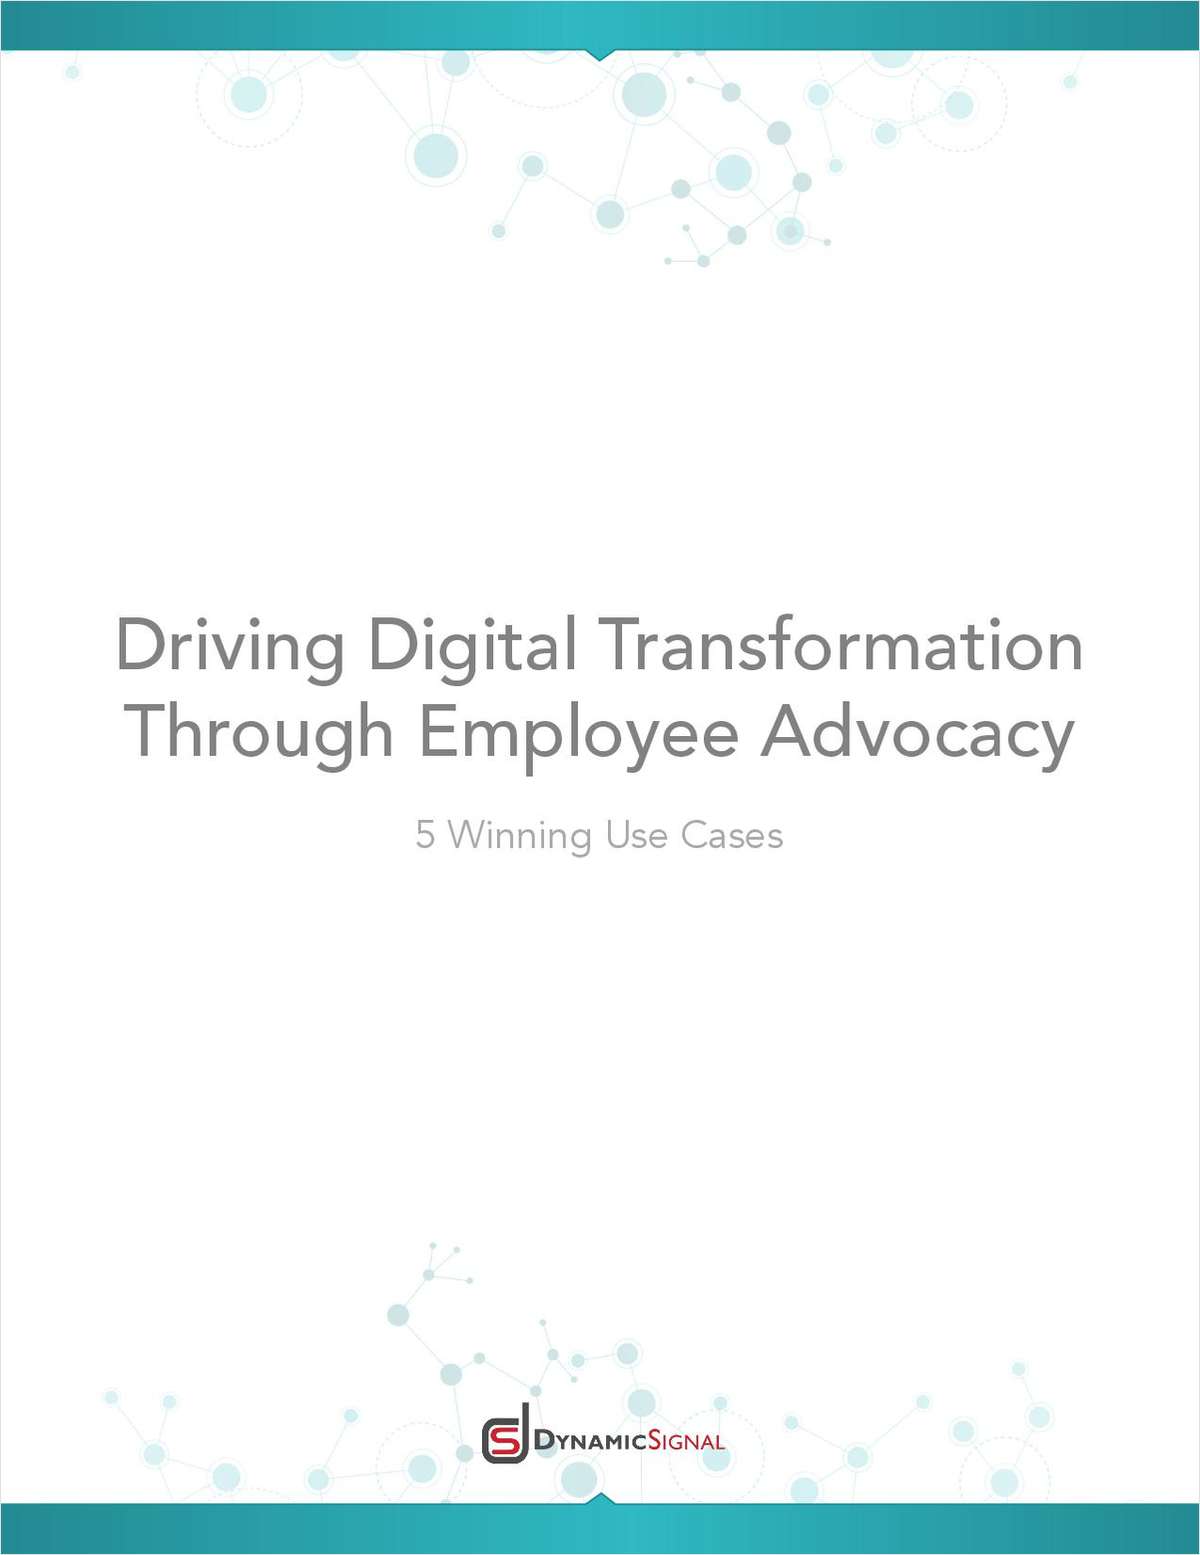 How to Drive a Digital Transformation Through Employee Advocacy